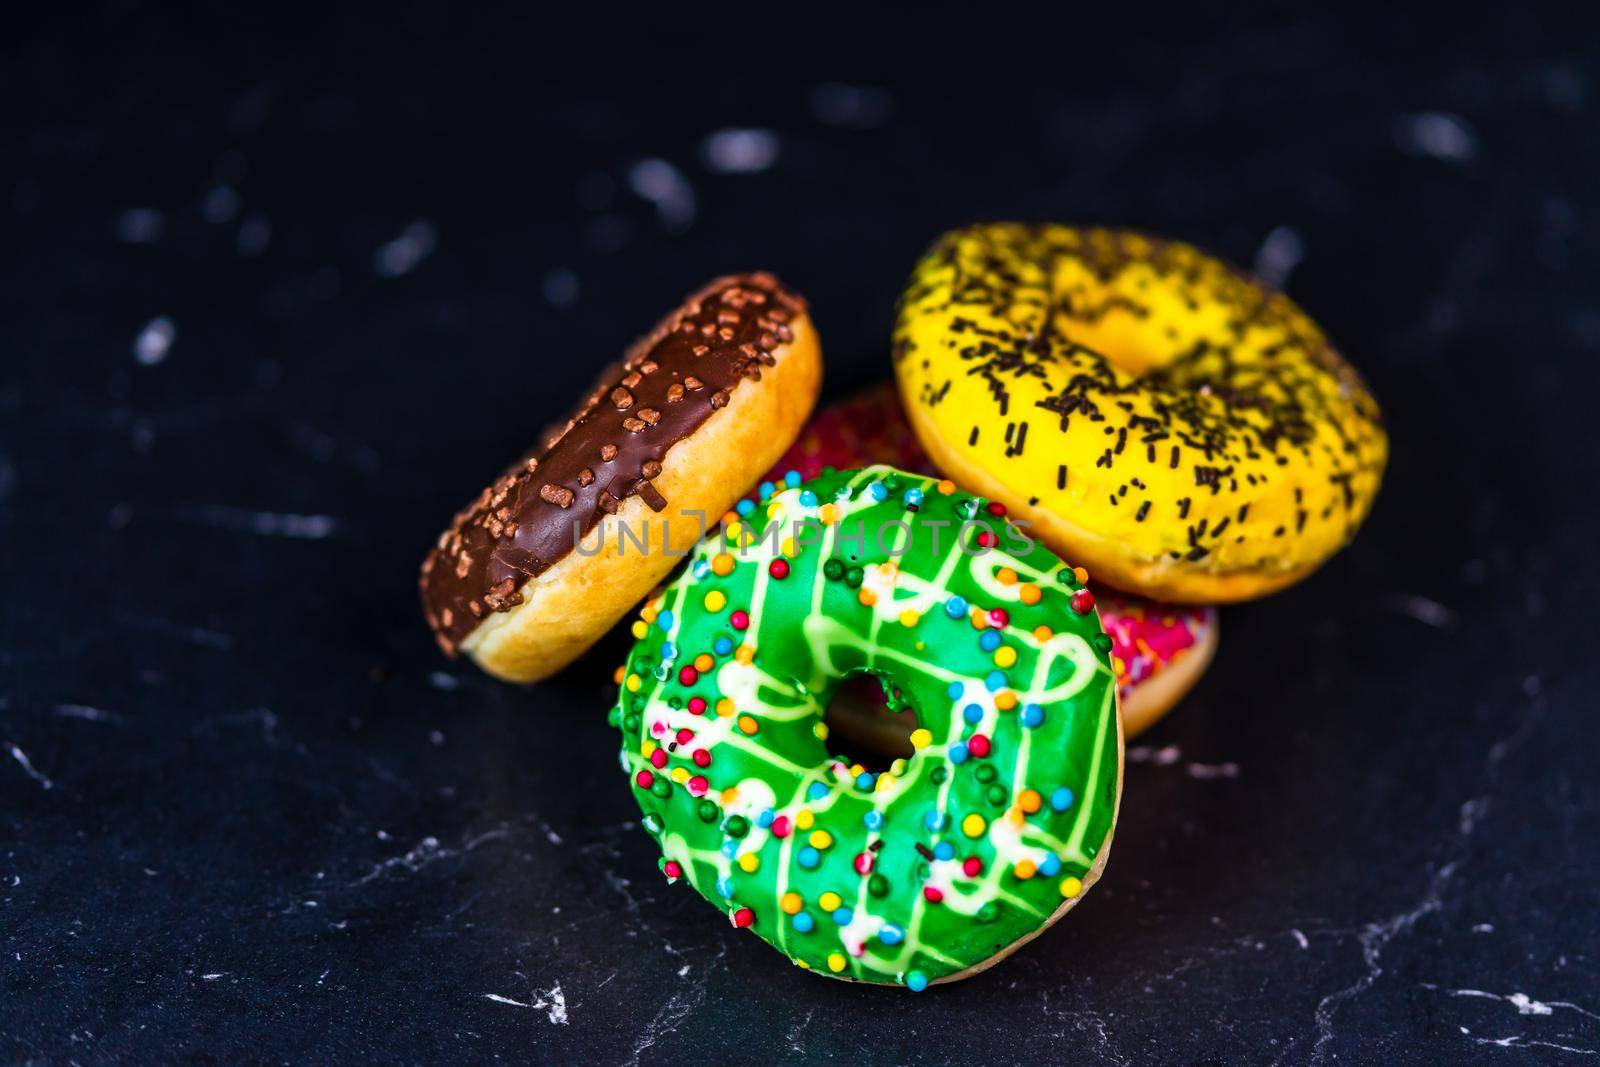 Glazed donuts with sprinkles isolated. Close up of colorful donuts.